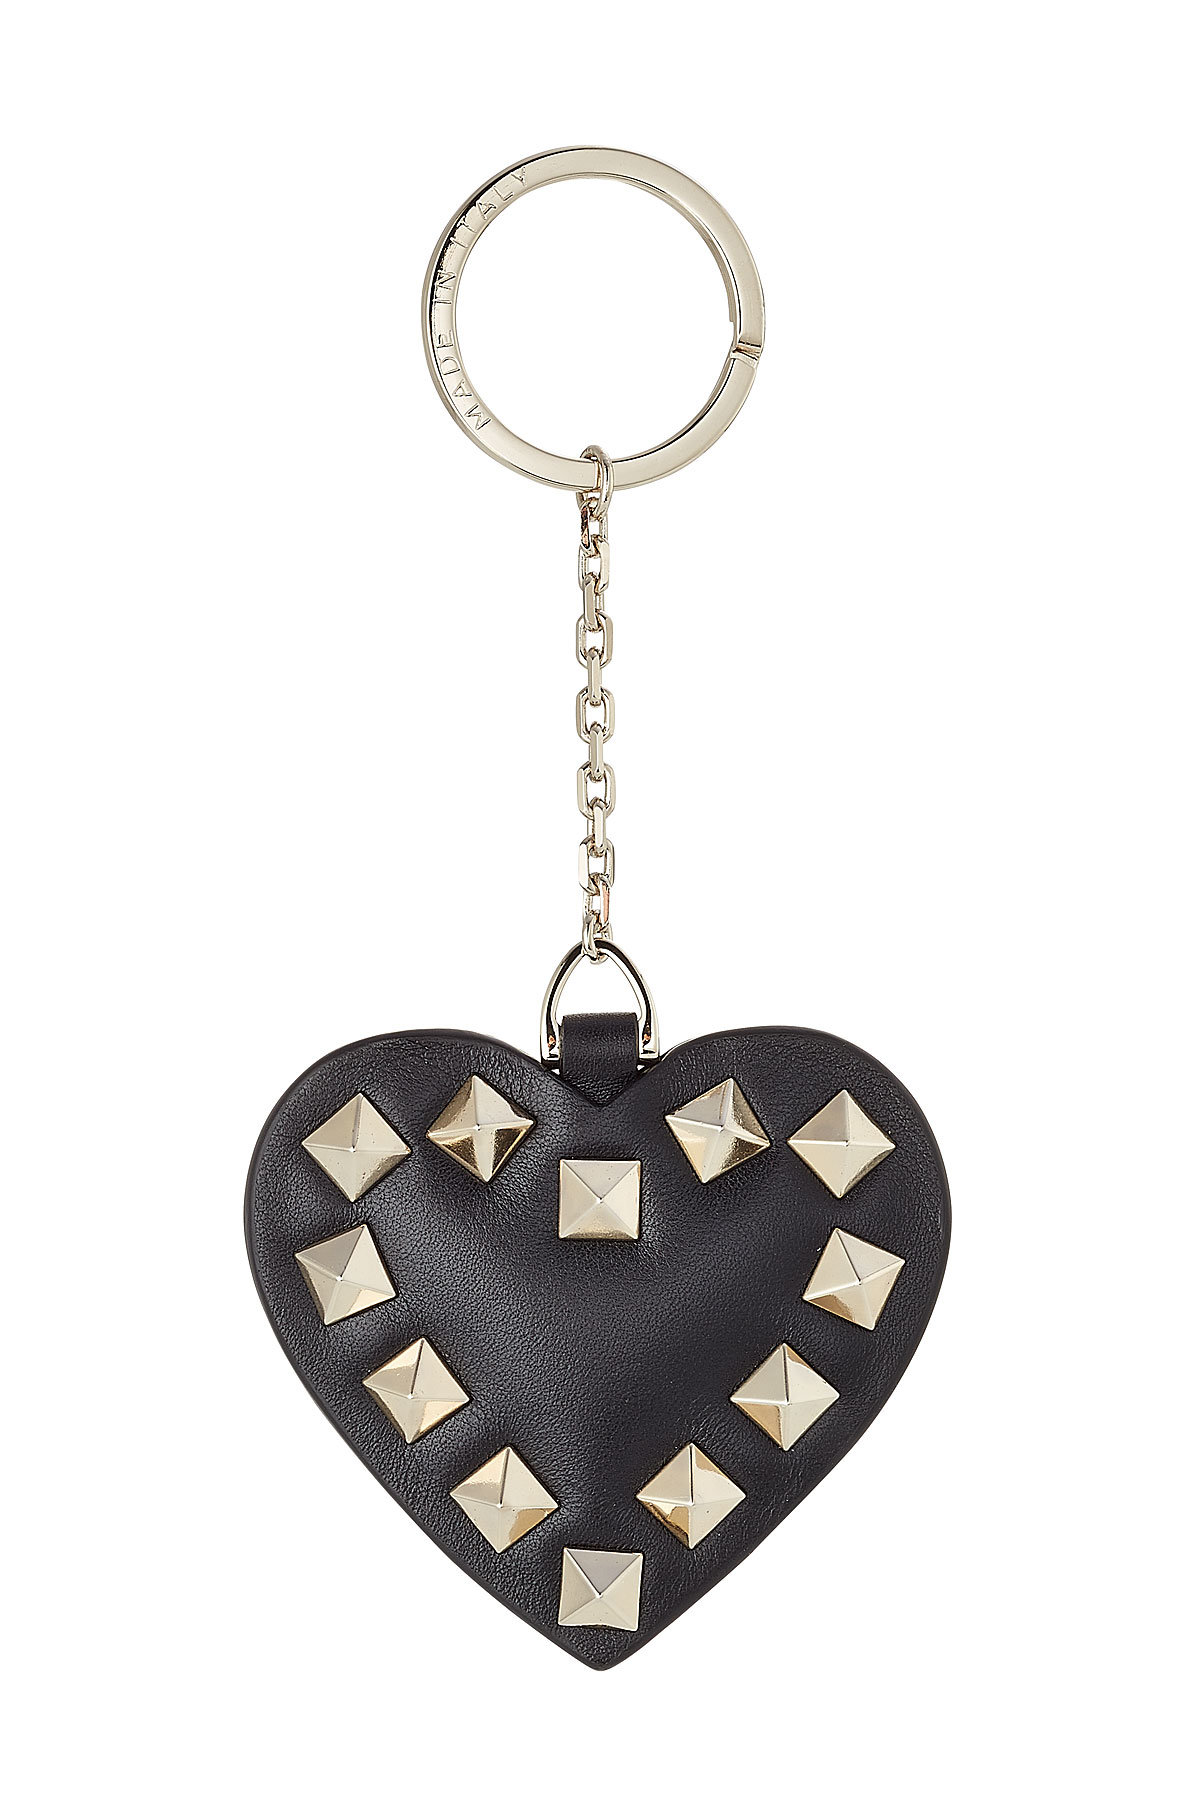 Rockstud Heart Leather Keychain by Valentino